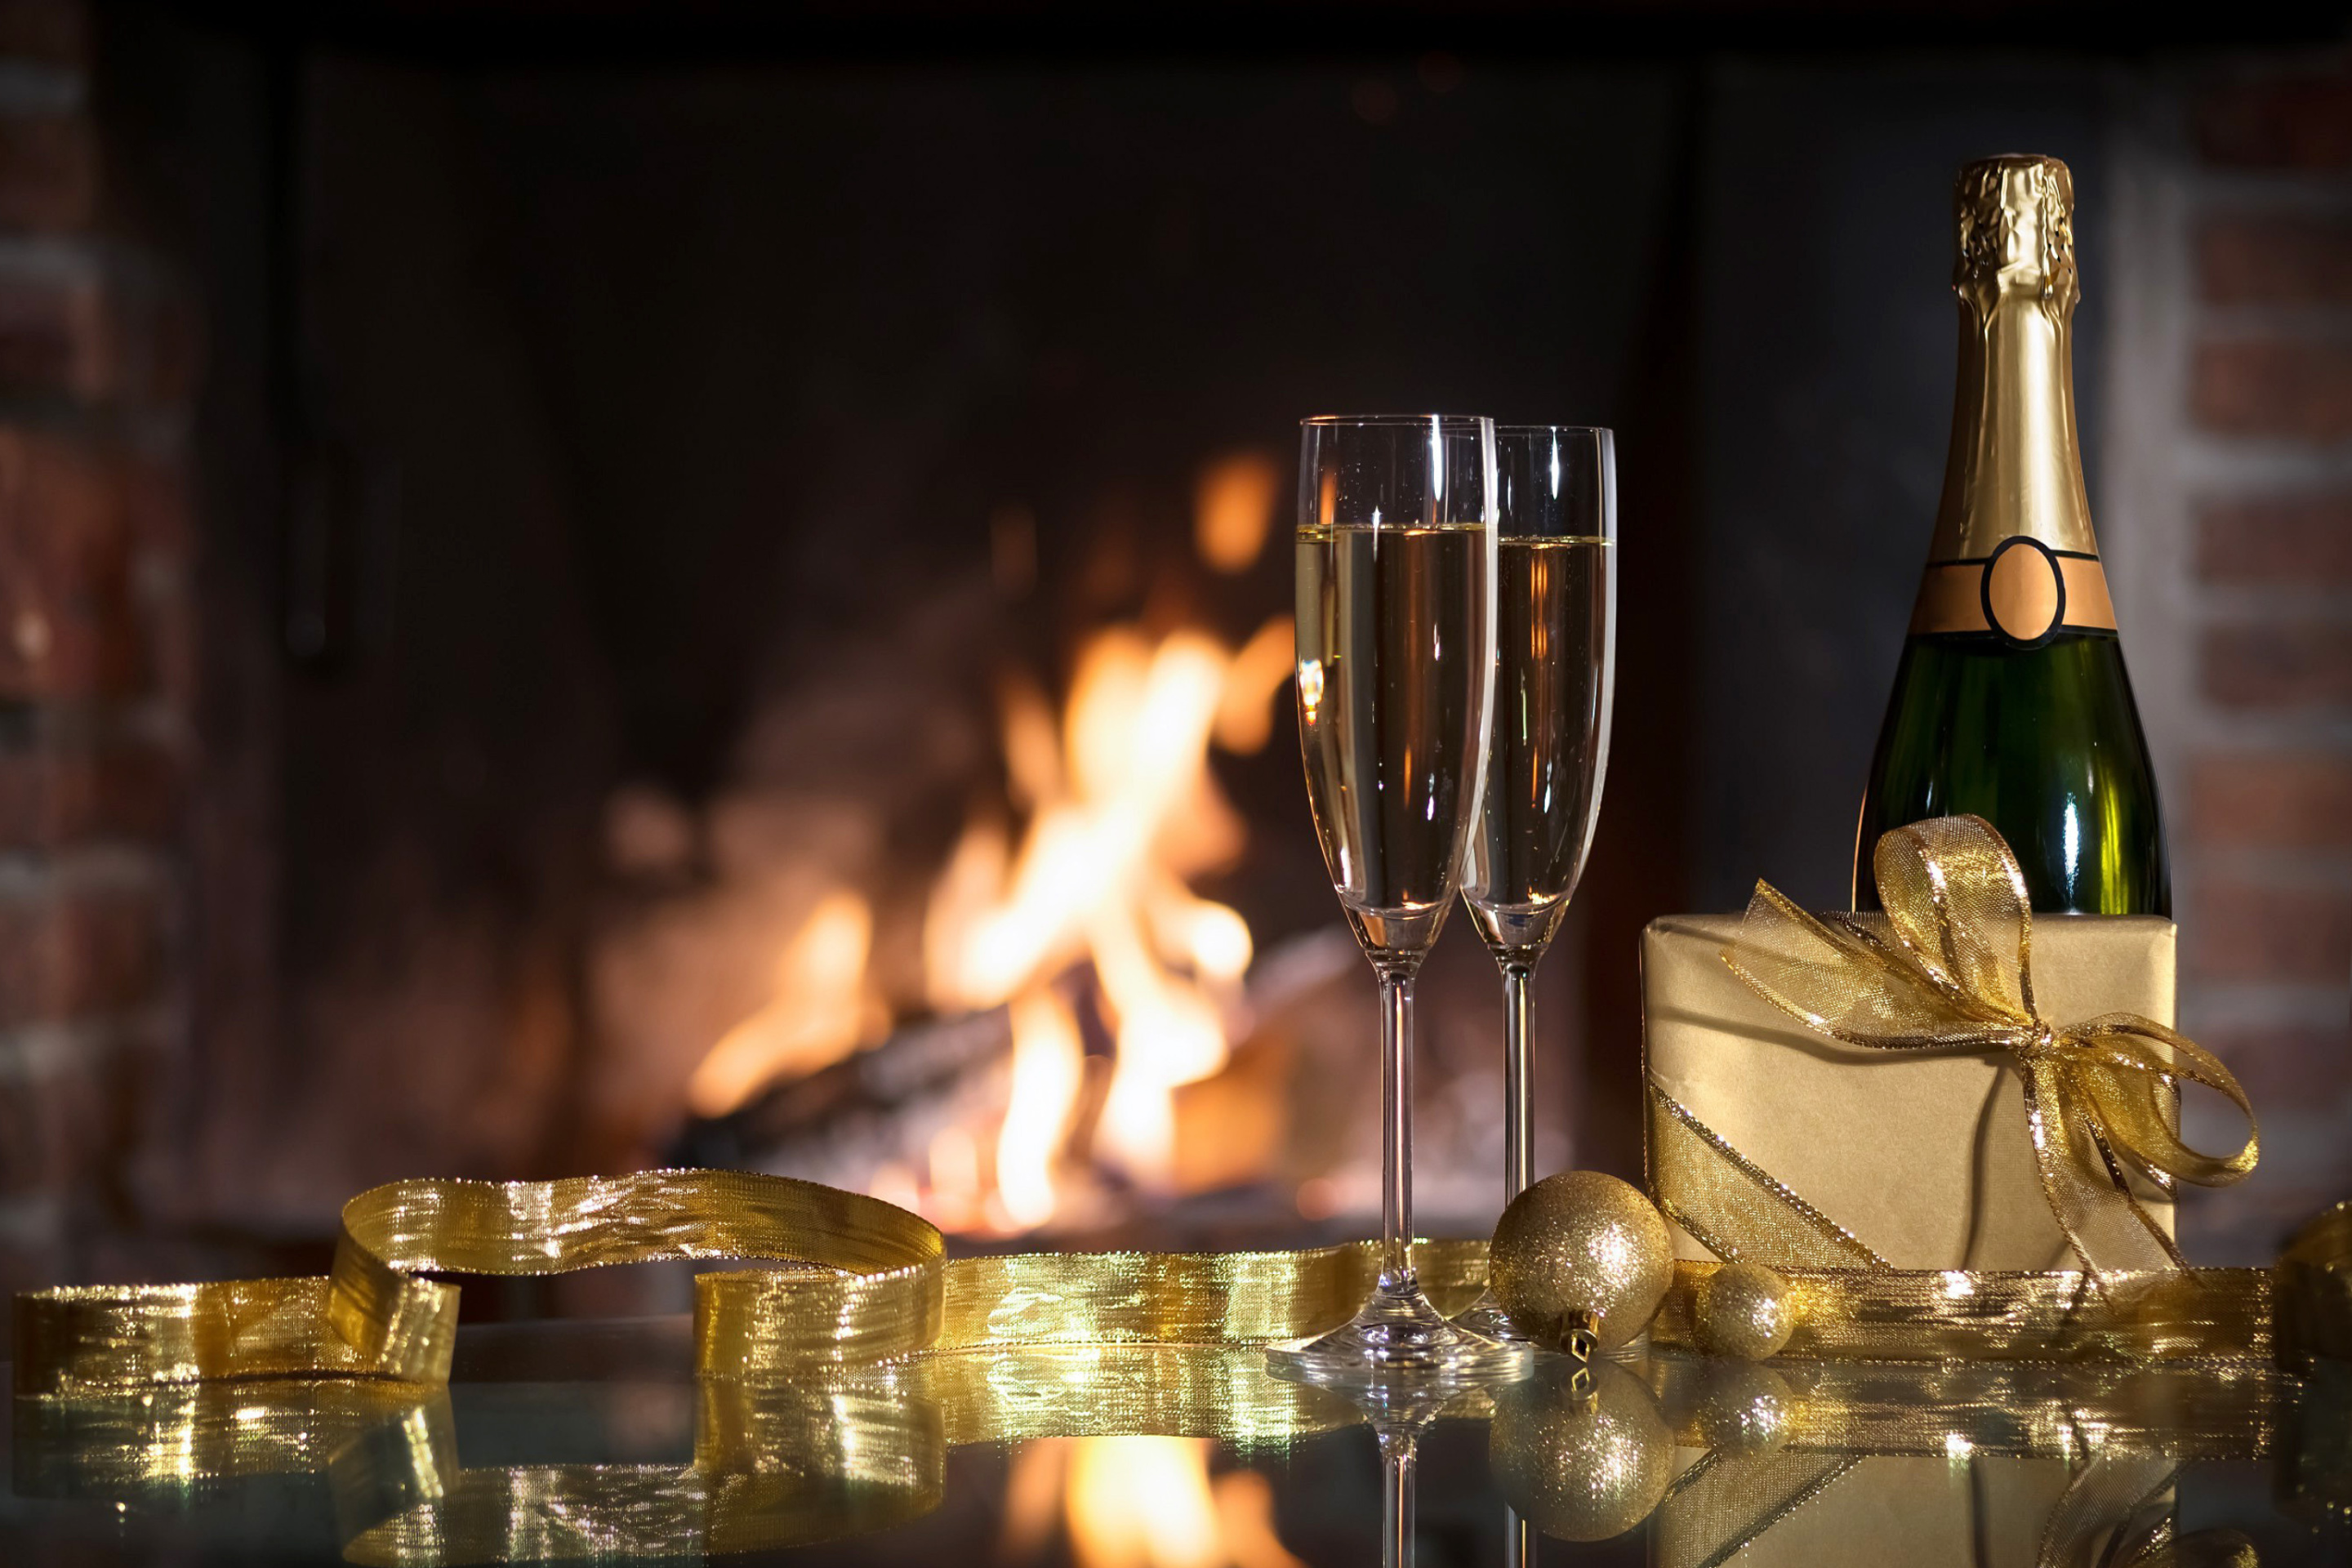 Das Champagne and Fireplace Wallpaper 2880x1920